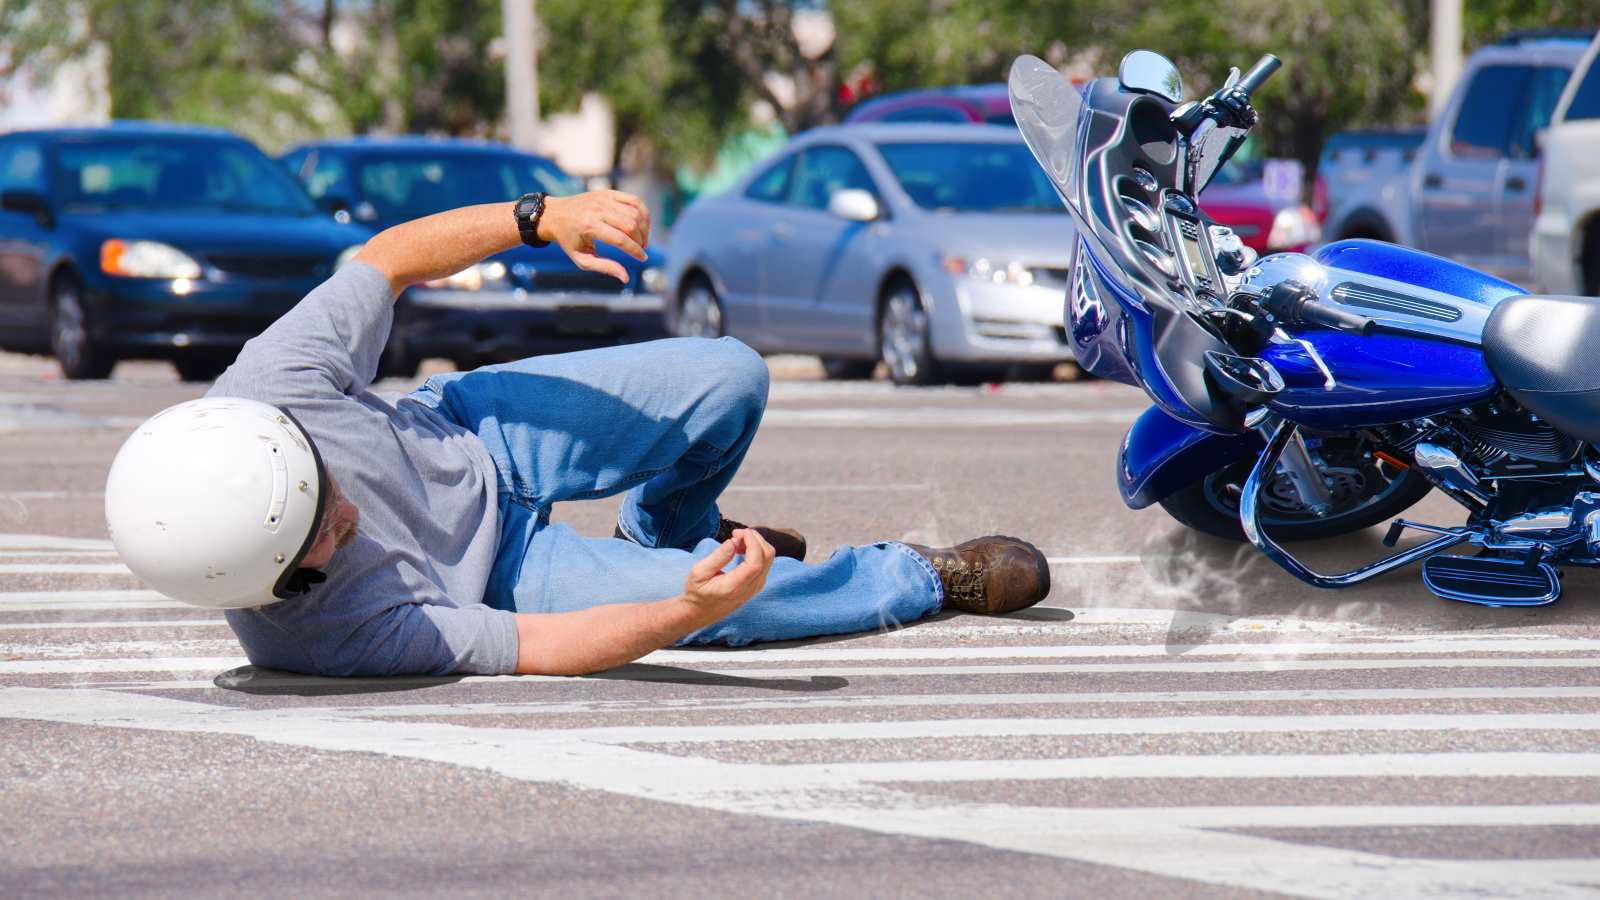 What To Do When You Come Across A Motorcycle Accident